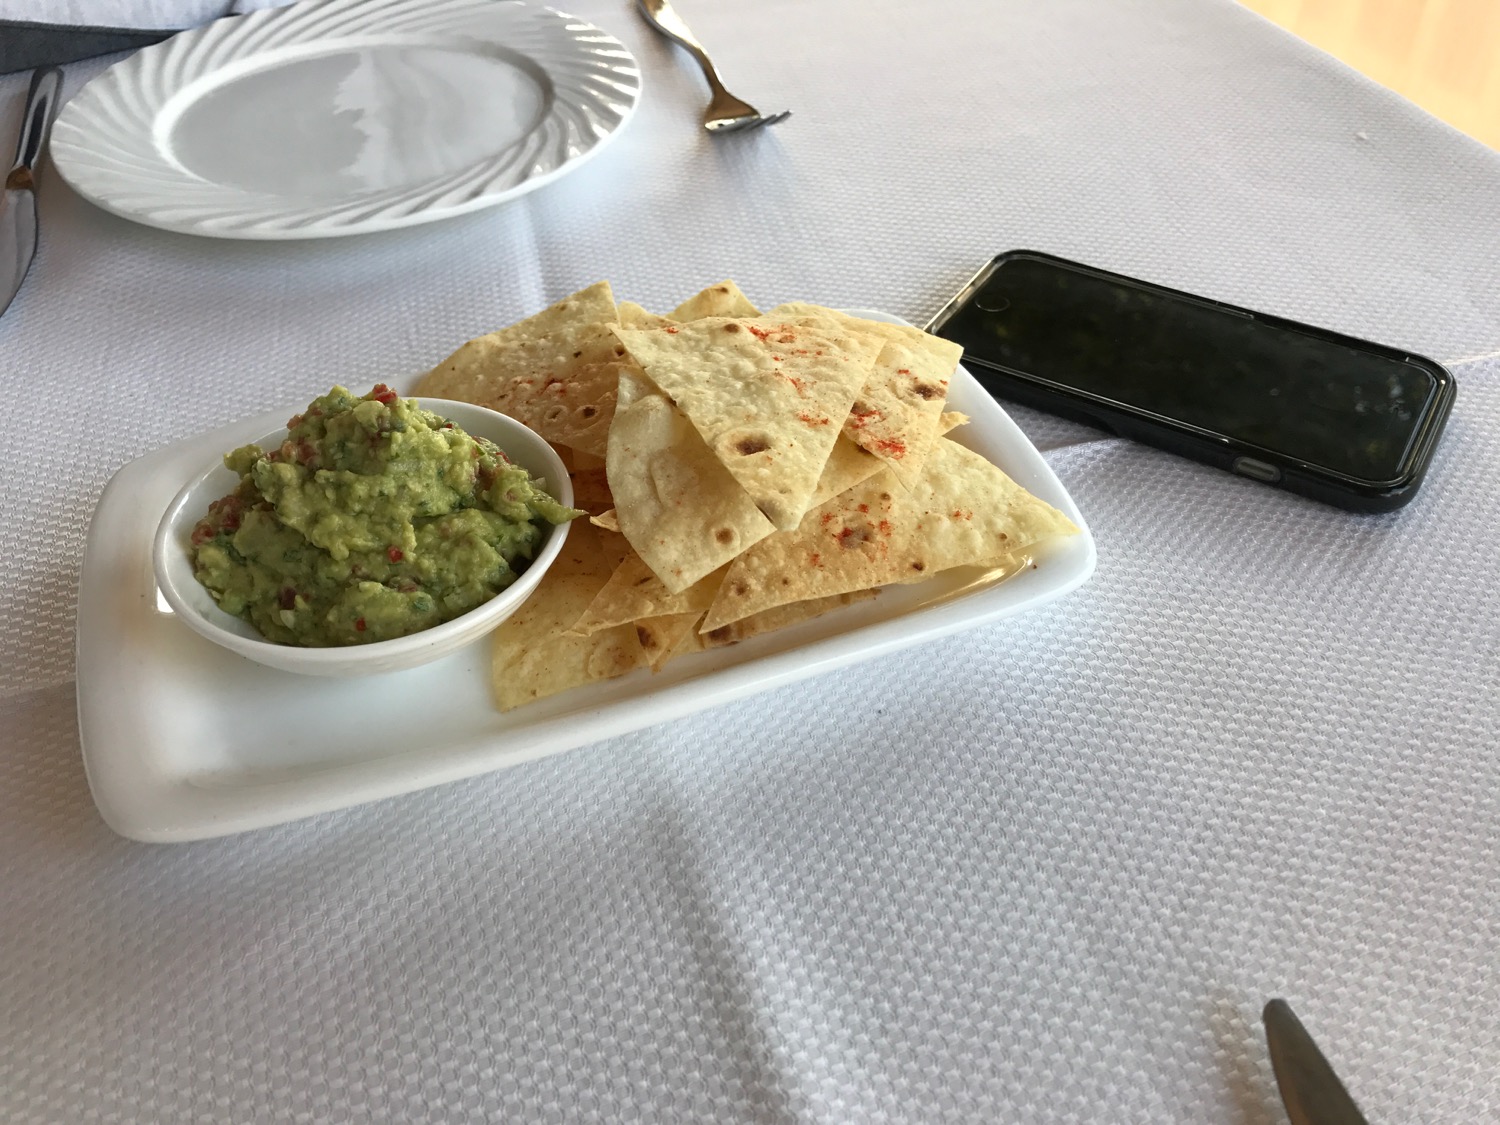 a plate of chips and guacamole on a table